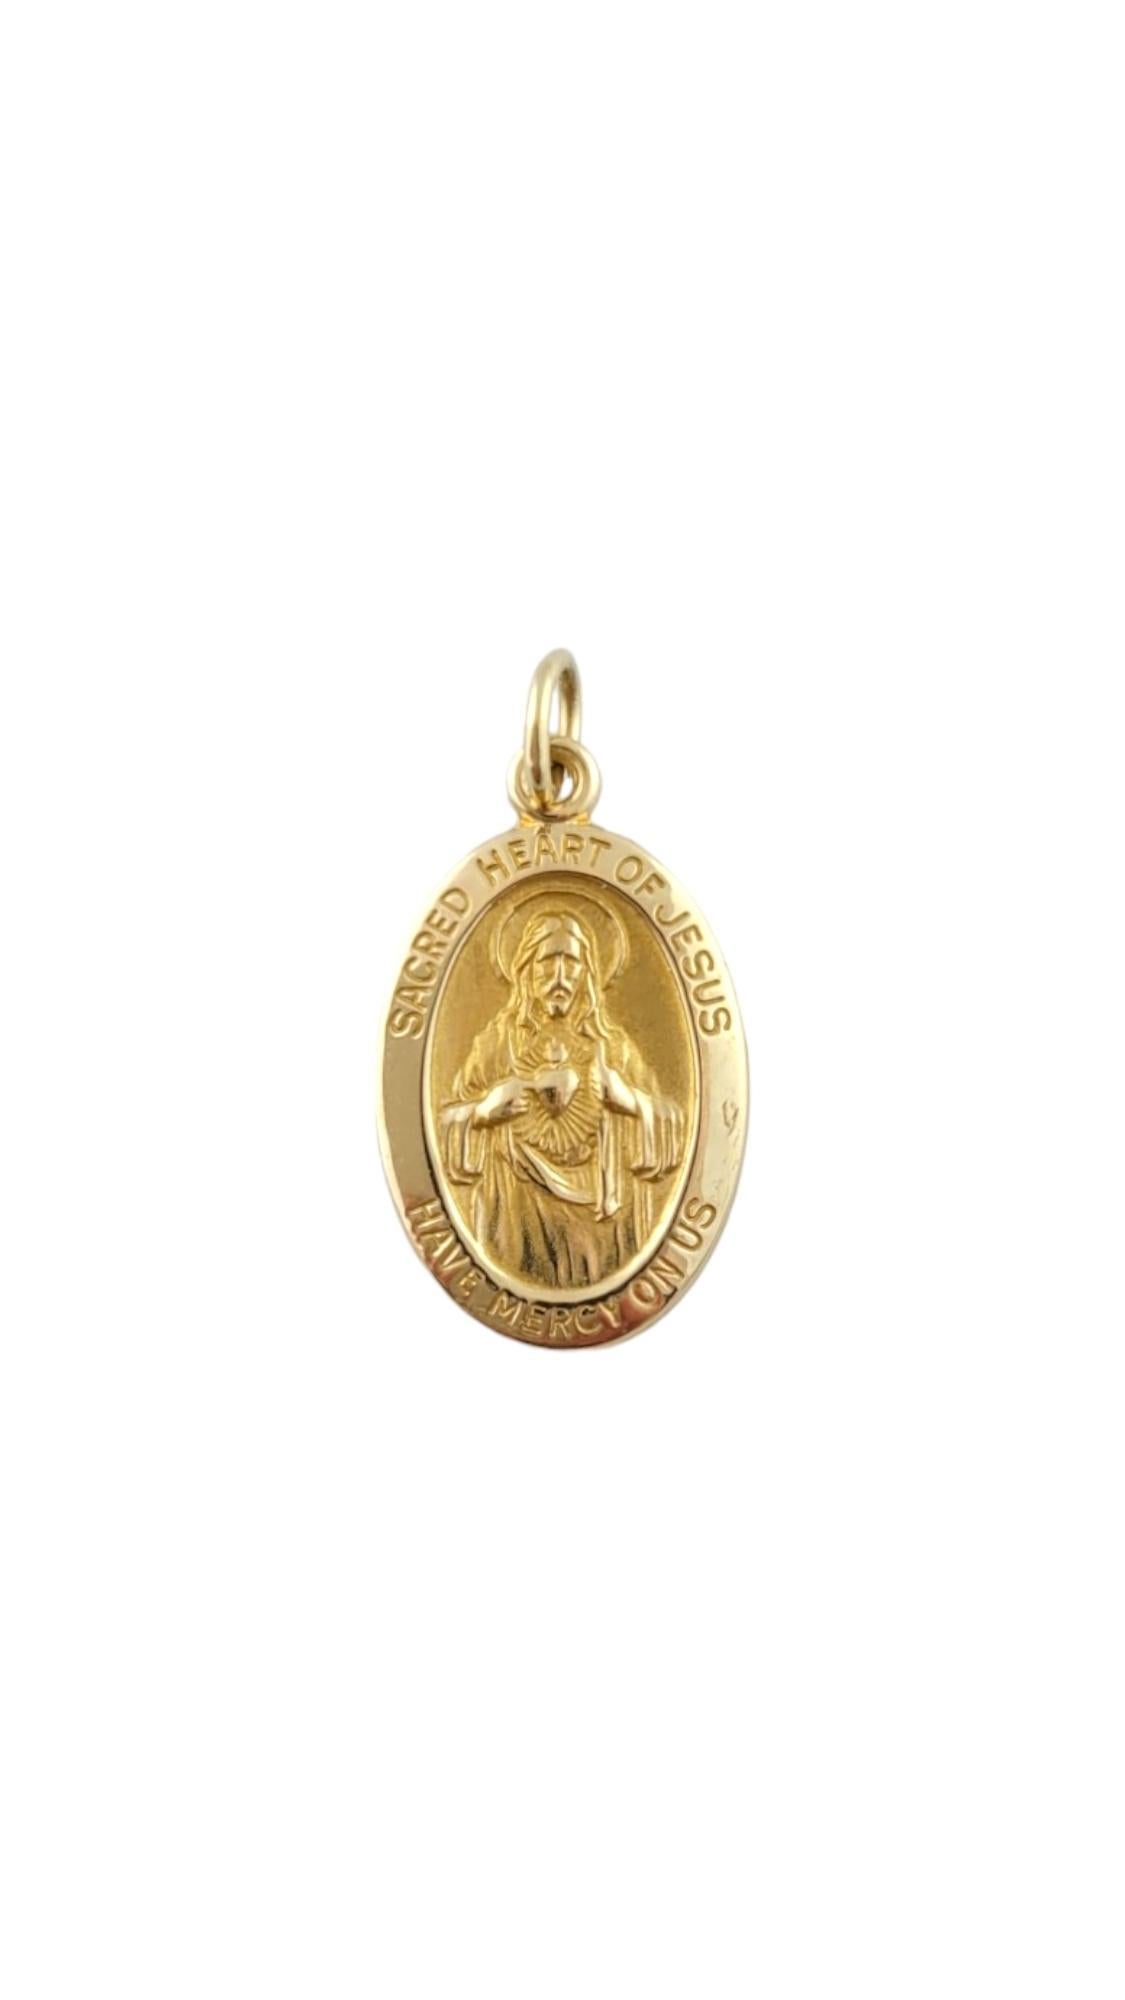 Vintage 14K Yellow Gold Sacred Heart of Jesus Charm

This gorgeous sacred heart of Jesus charm was meticulously crafted from 14K yellow gold and would look beautiful on a chain!

Size: 17.6mm X 10.69mm X 1.04mm
Length w/ bail: 20.5mm

Weight: 0.8